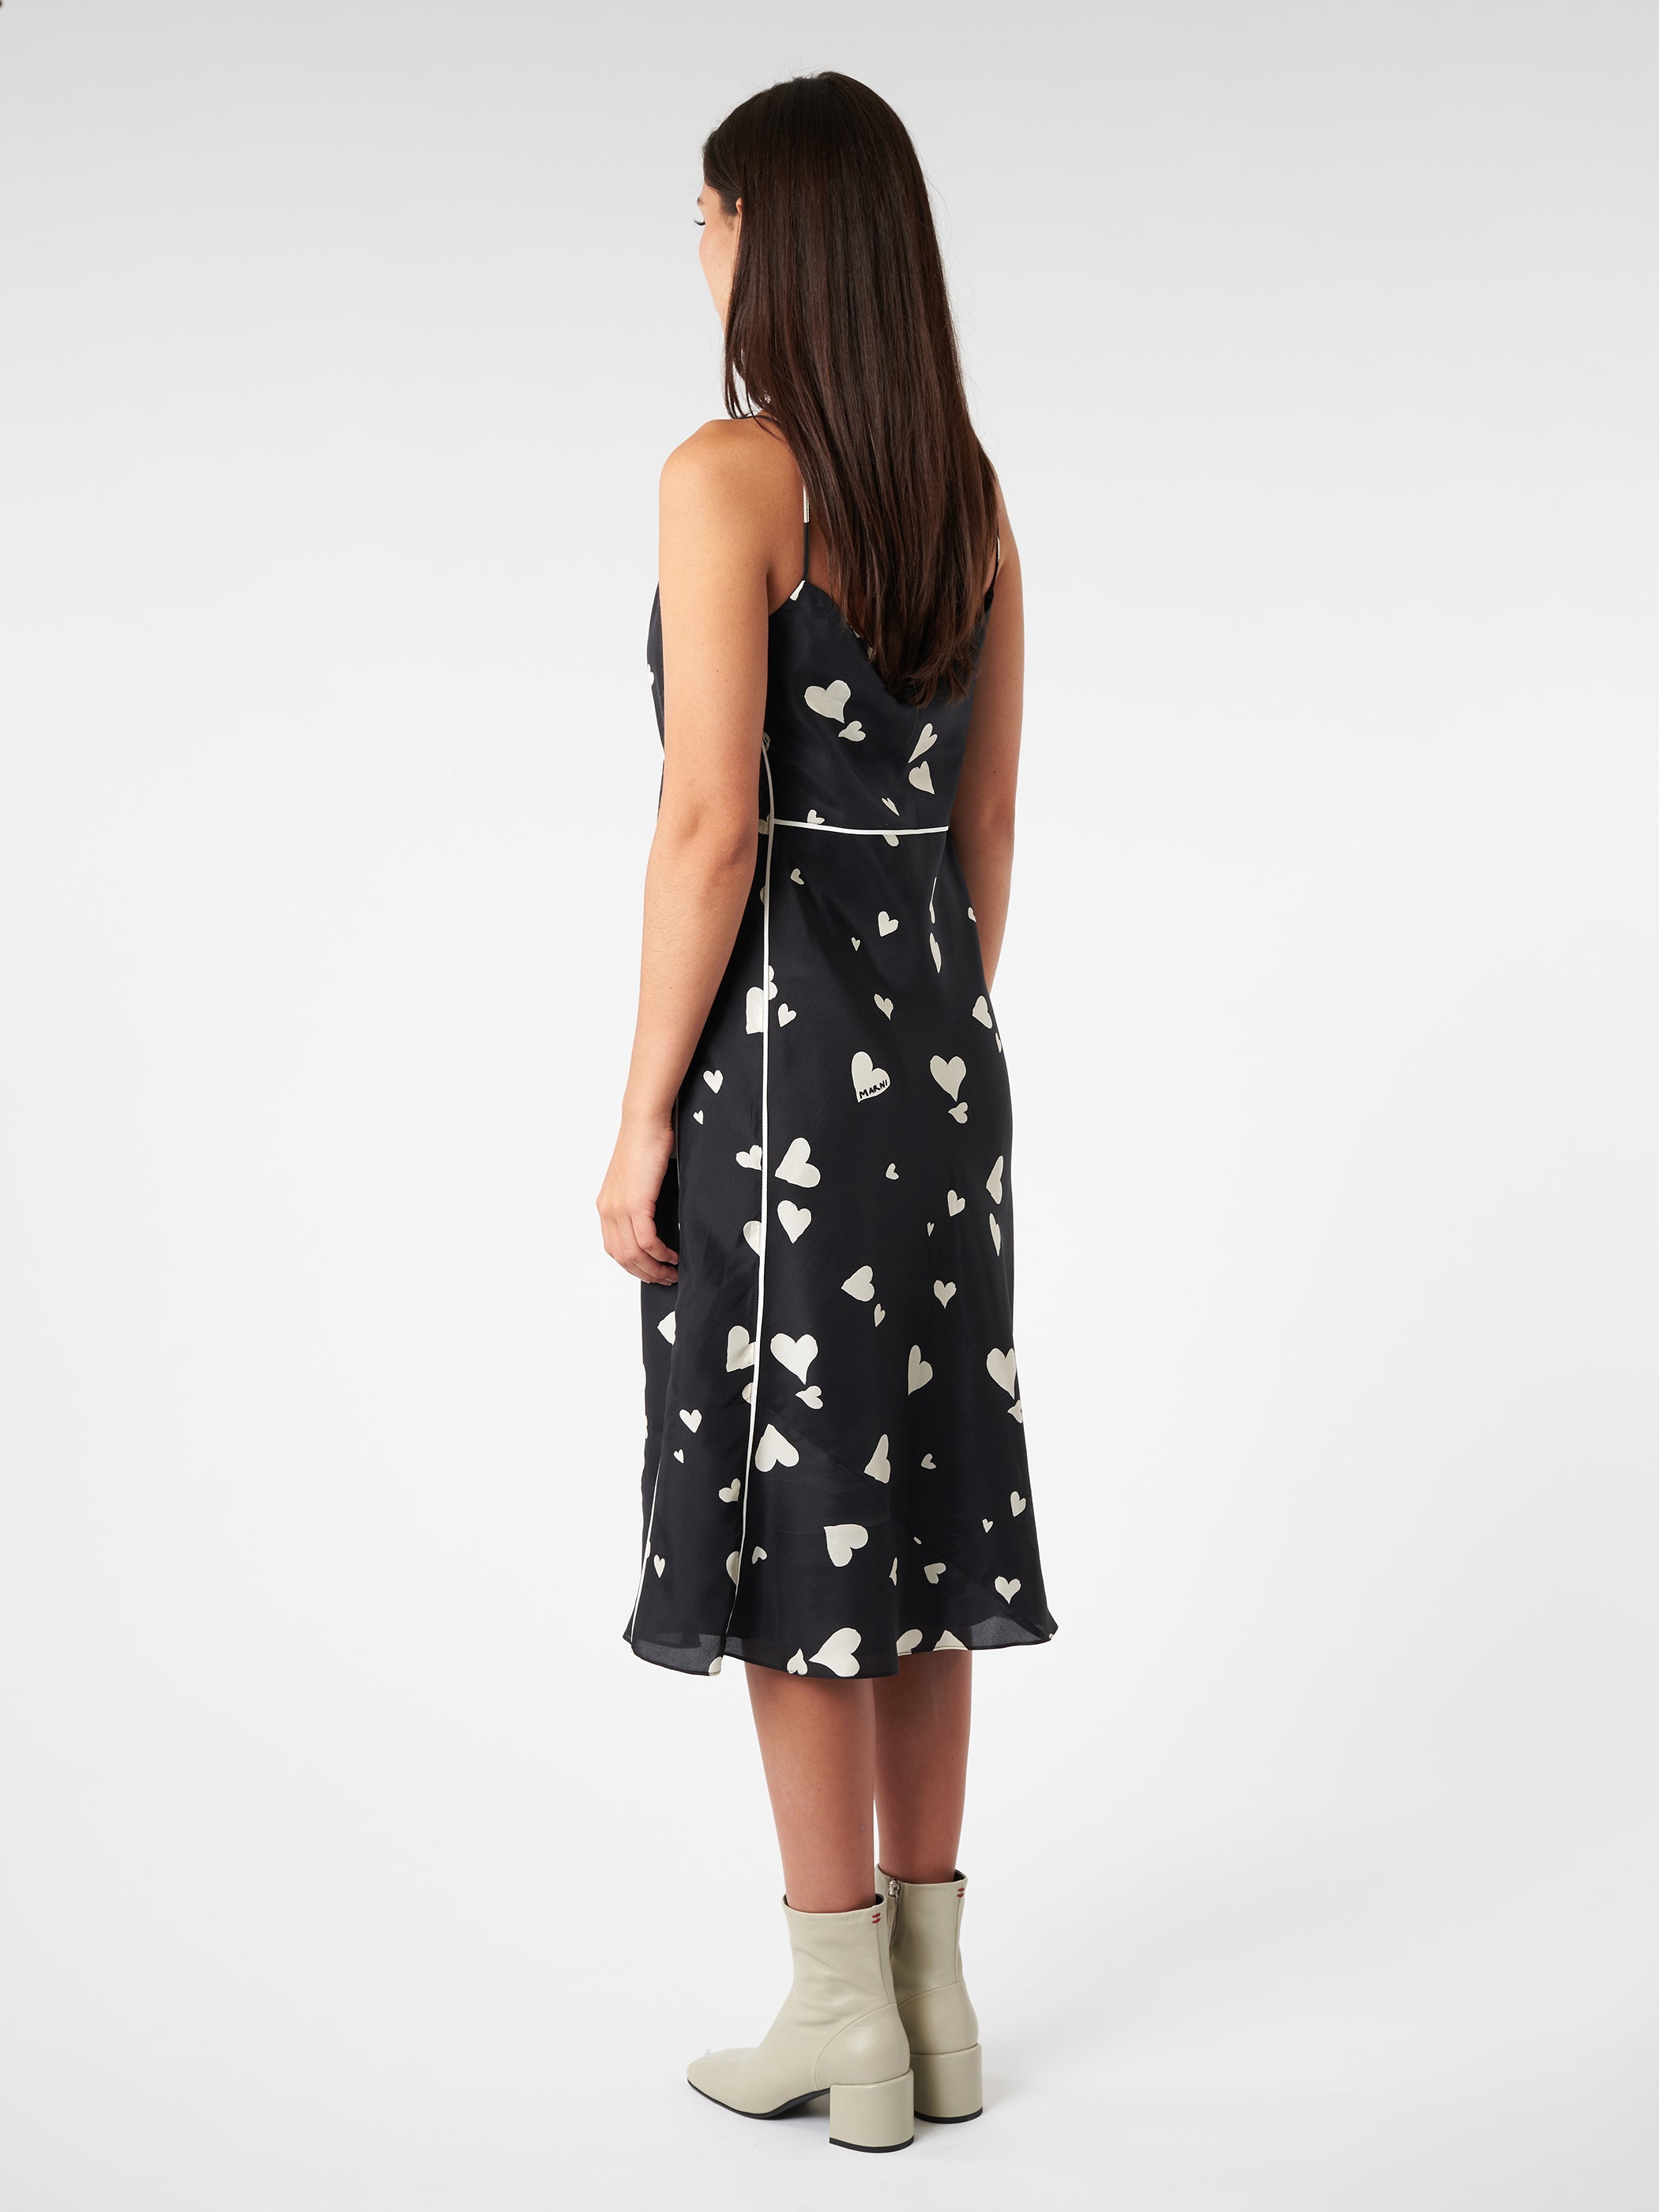 Silk Slip Dress With Bunch Of Hearts Print